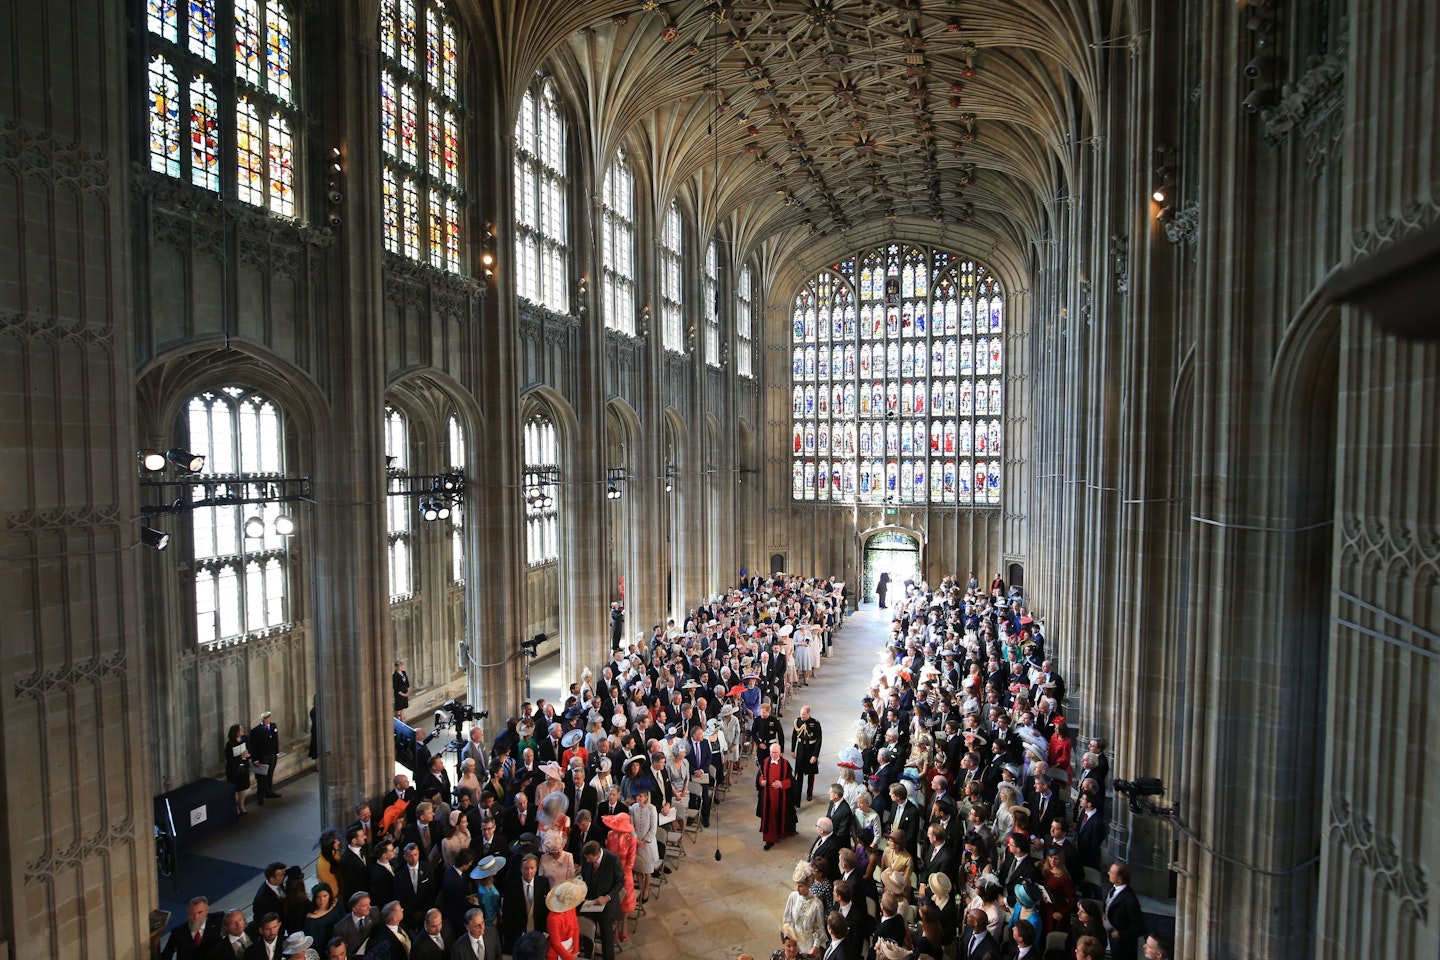 prince harry's wedding at st george's chapel, windsor